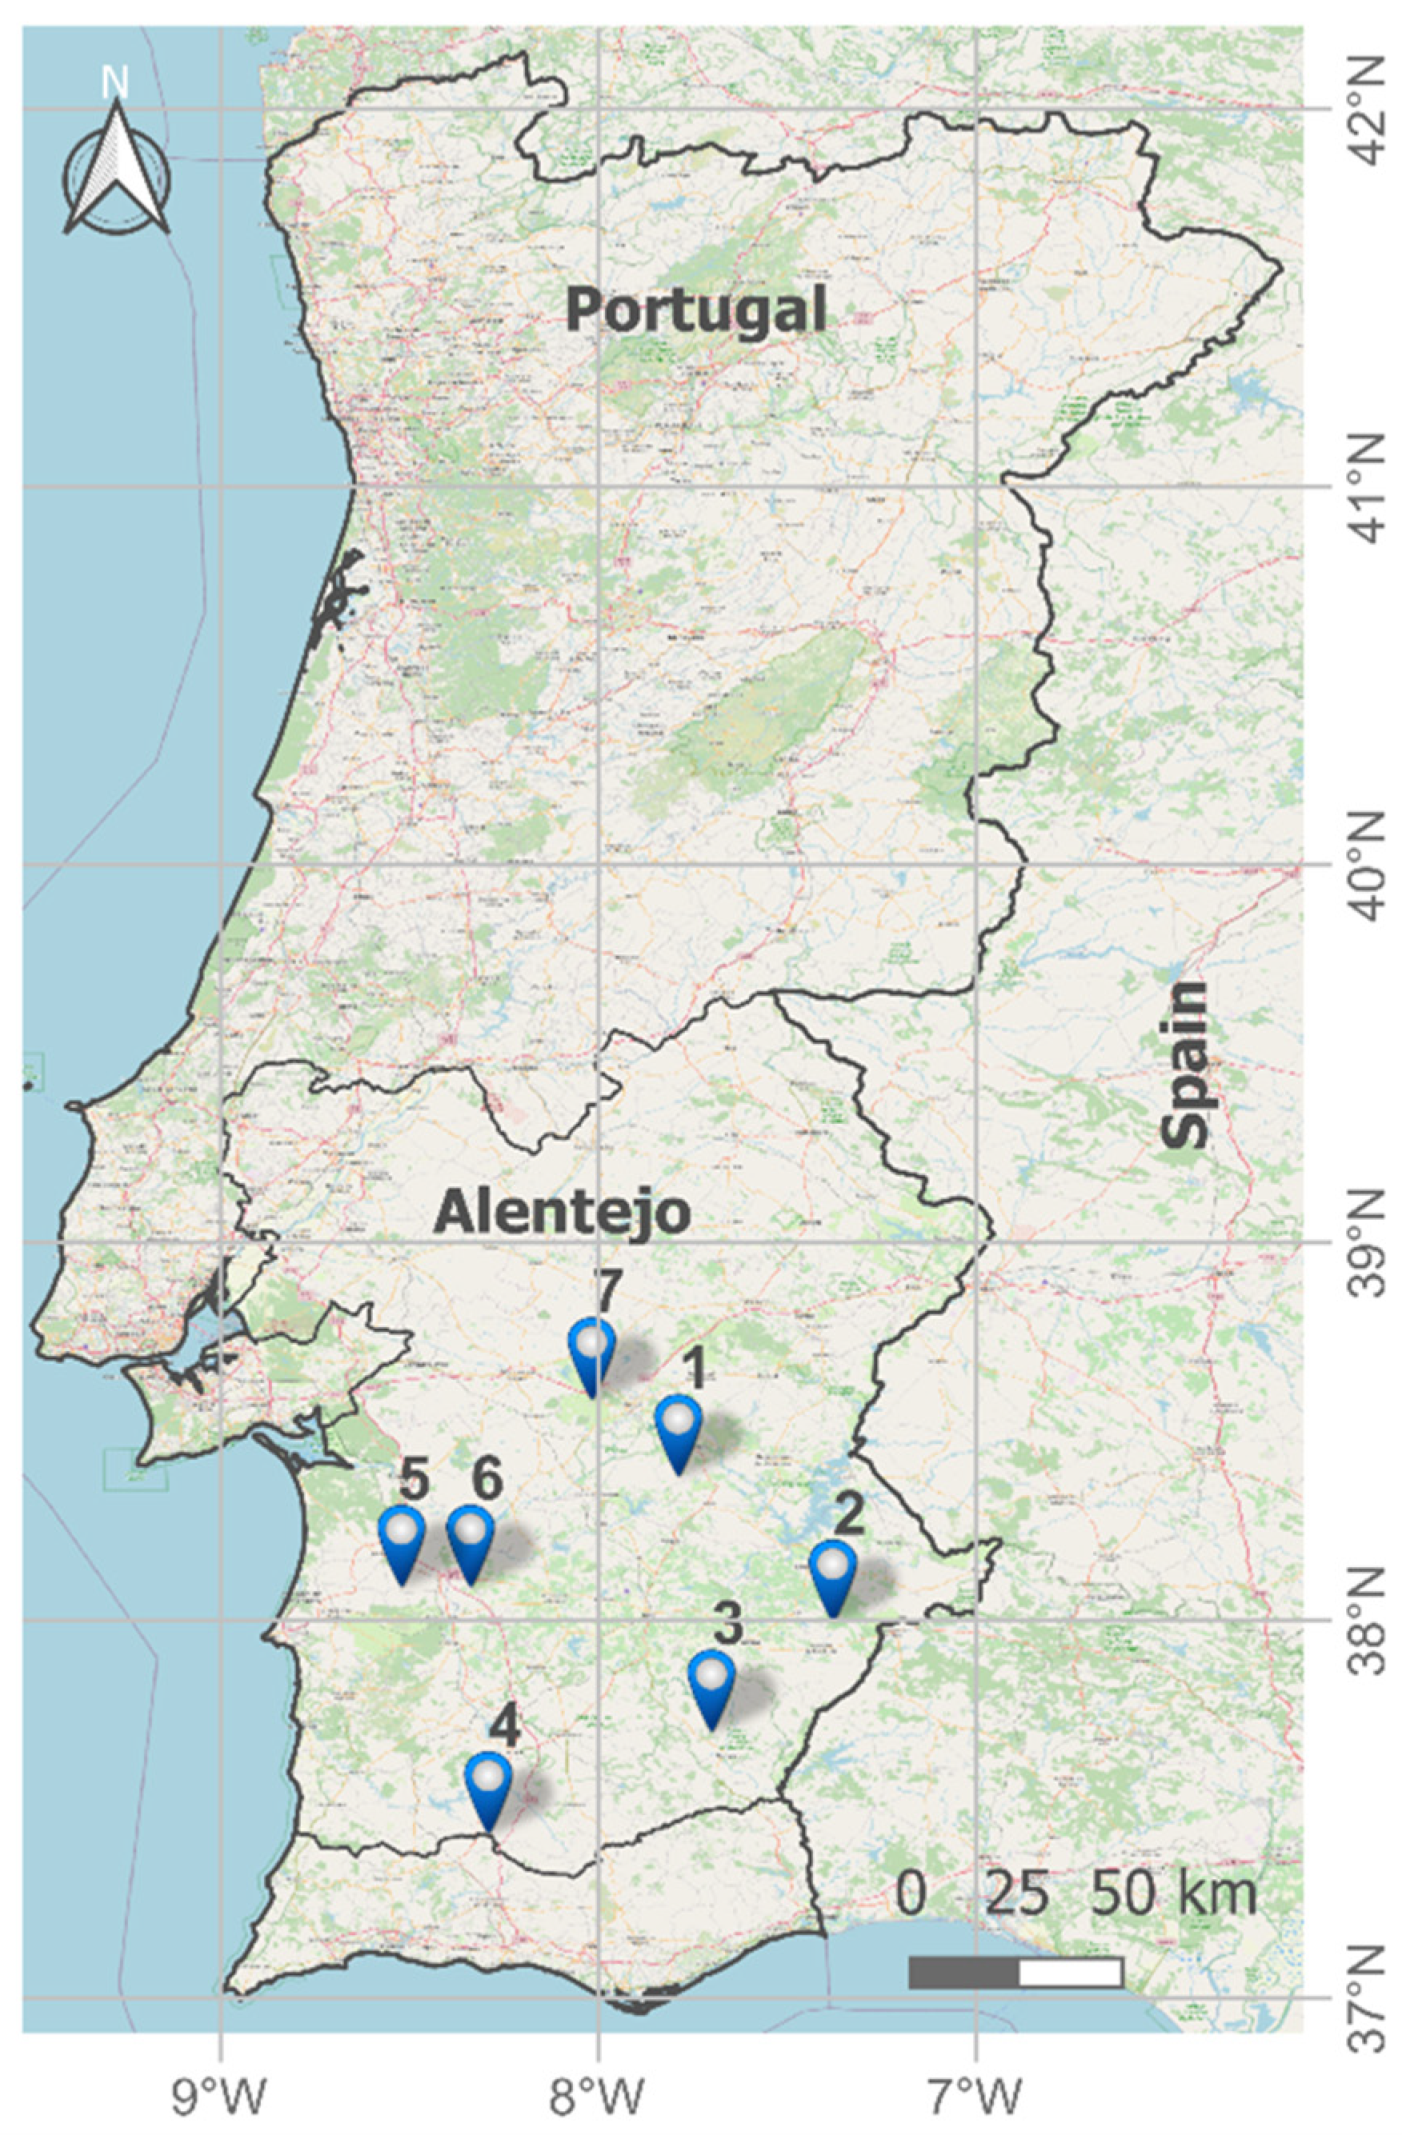 Odemira and Serpa location in Alentejo, South of Portugal map